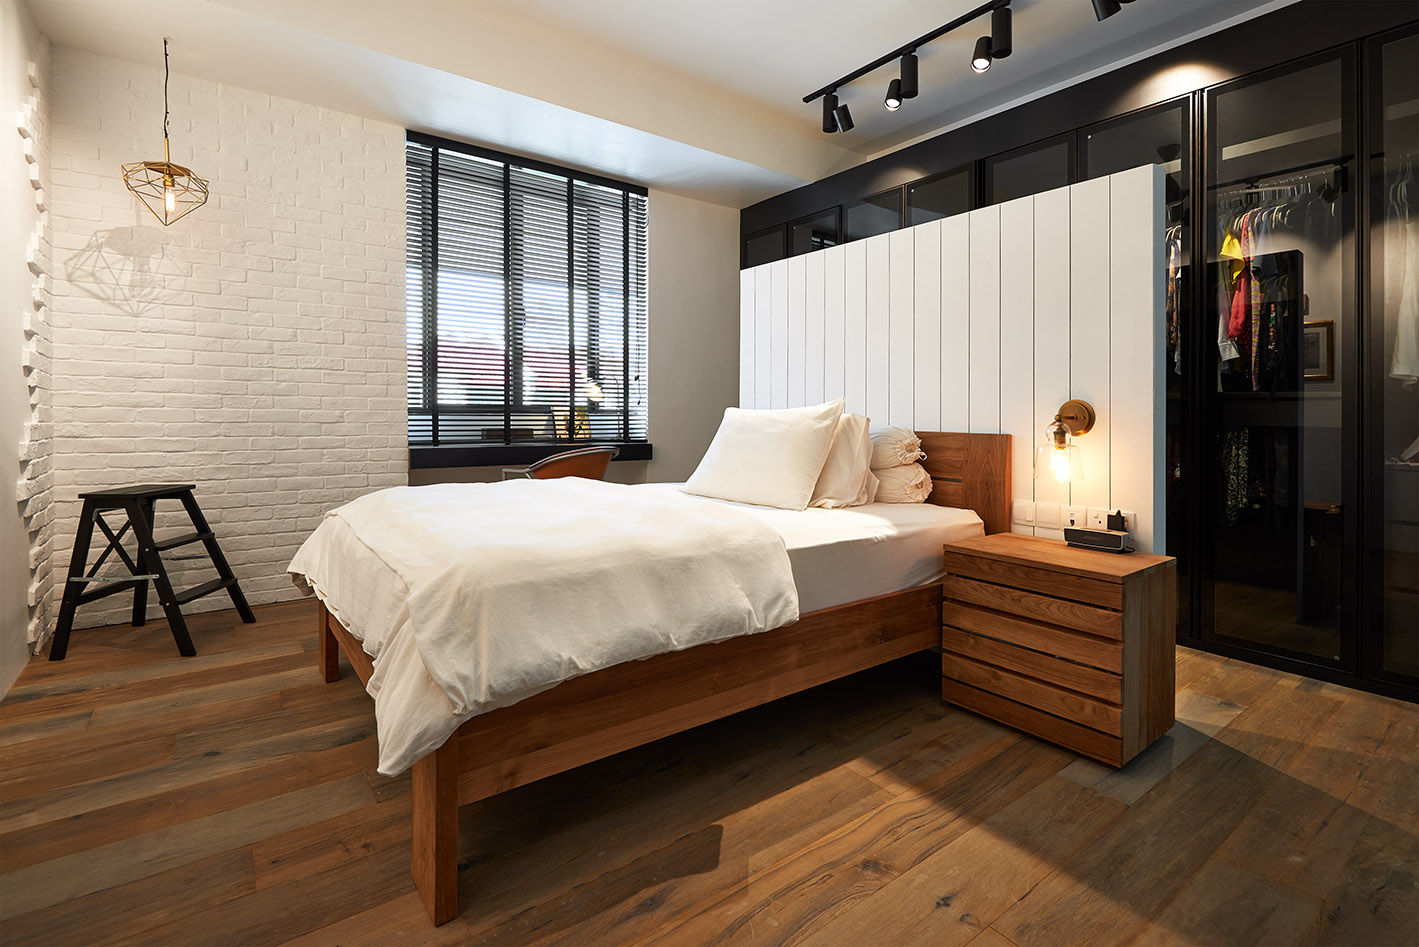 Scandustrial Theme homify Industrial style bedroom